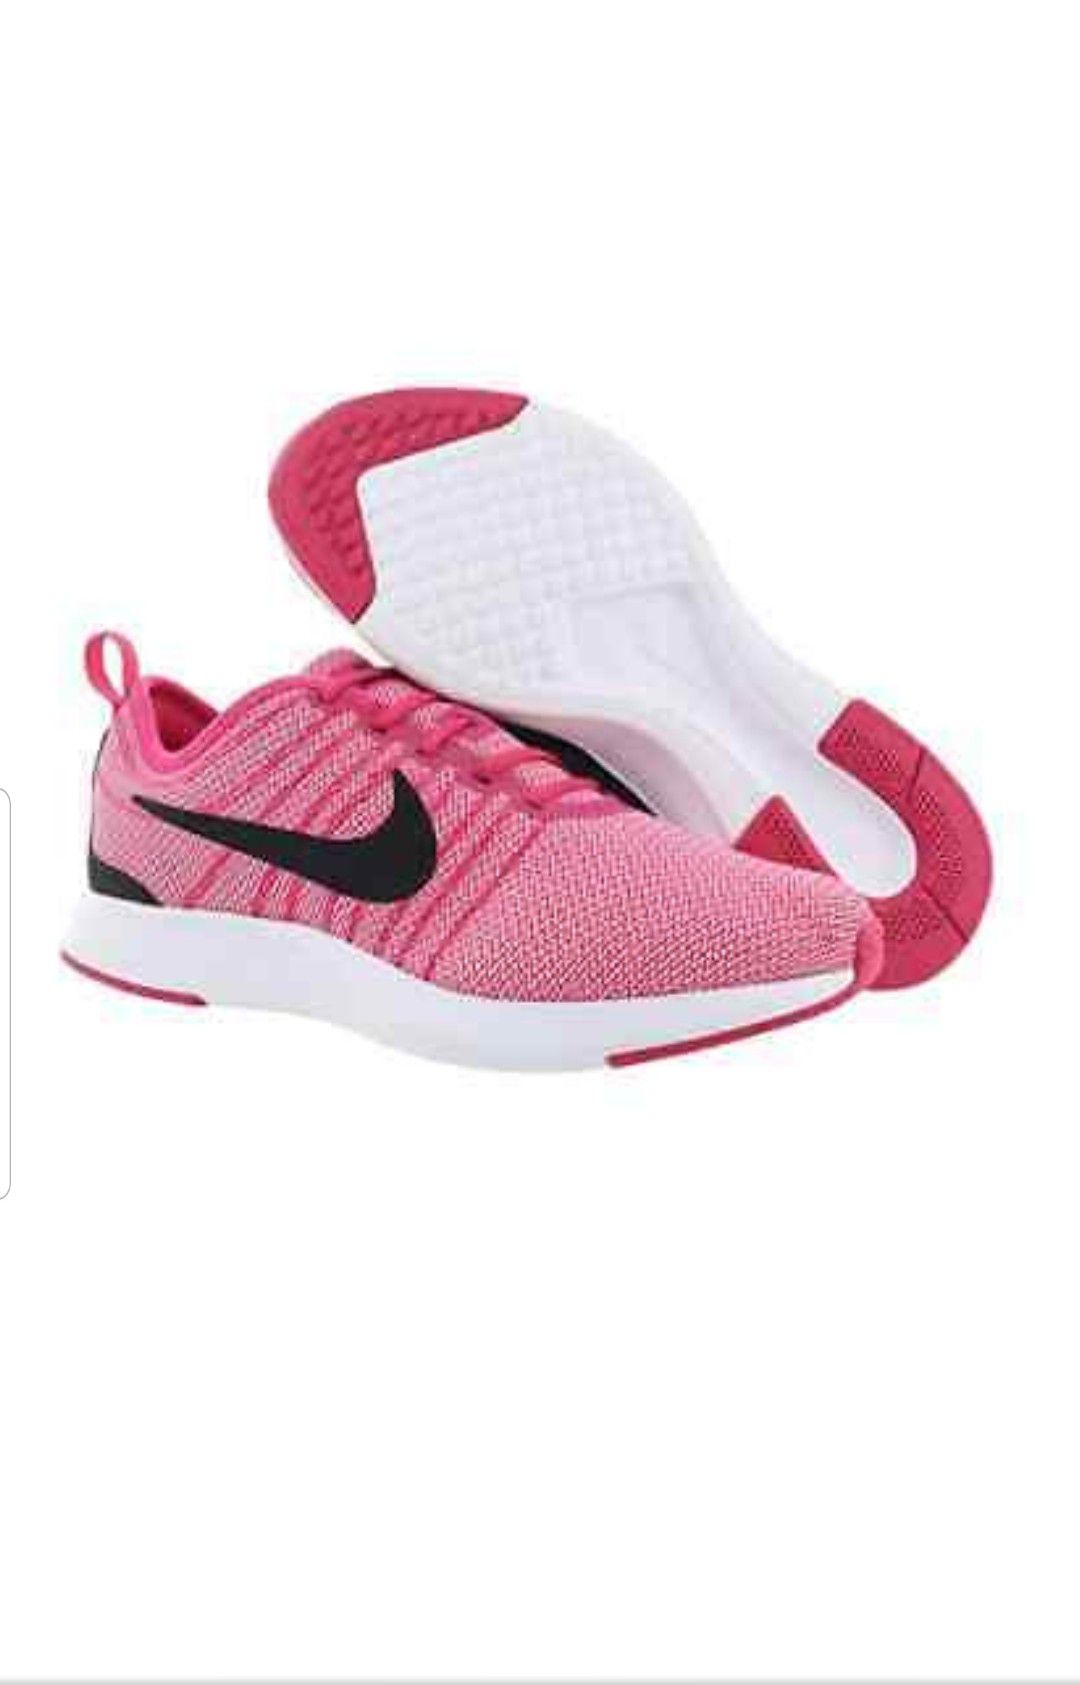 NIKE shoes brand new size 5,5.5,6,6.5